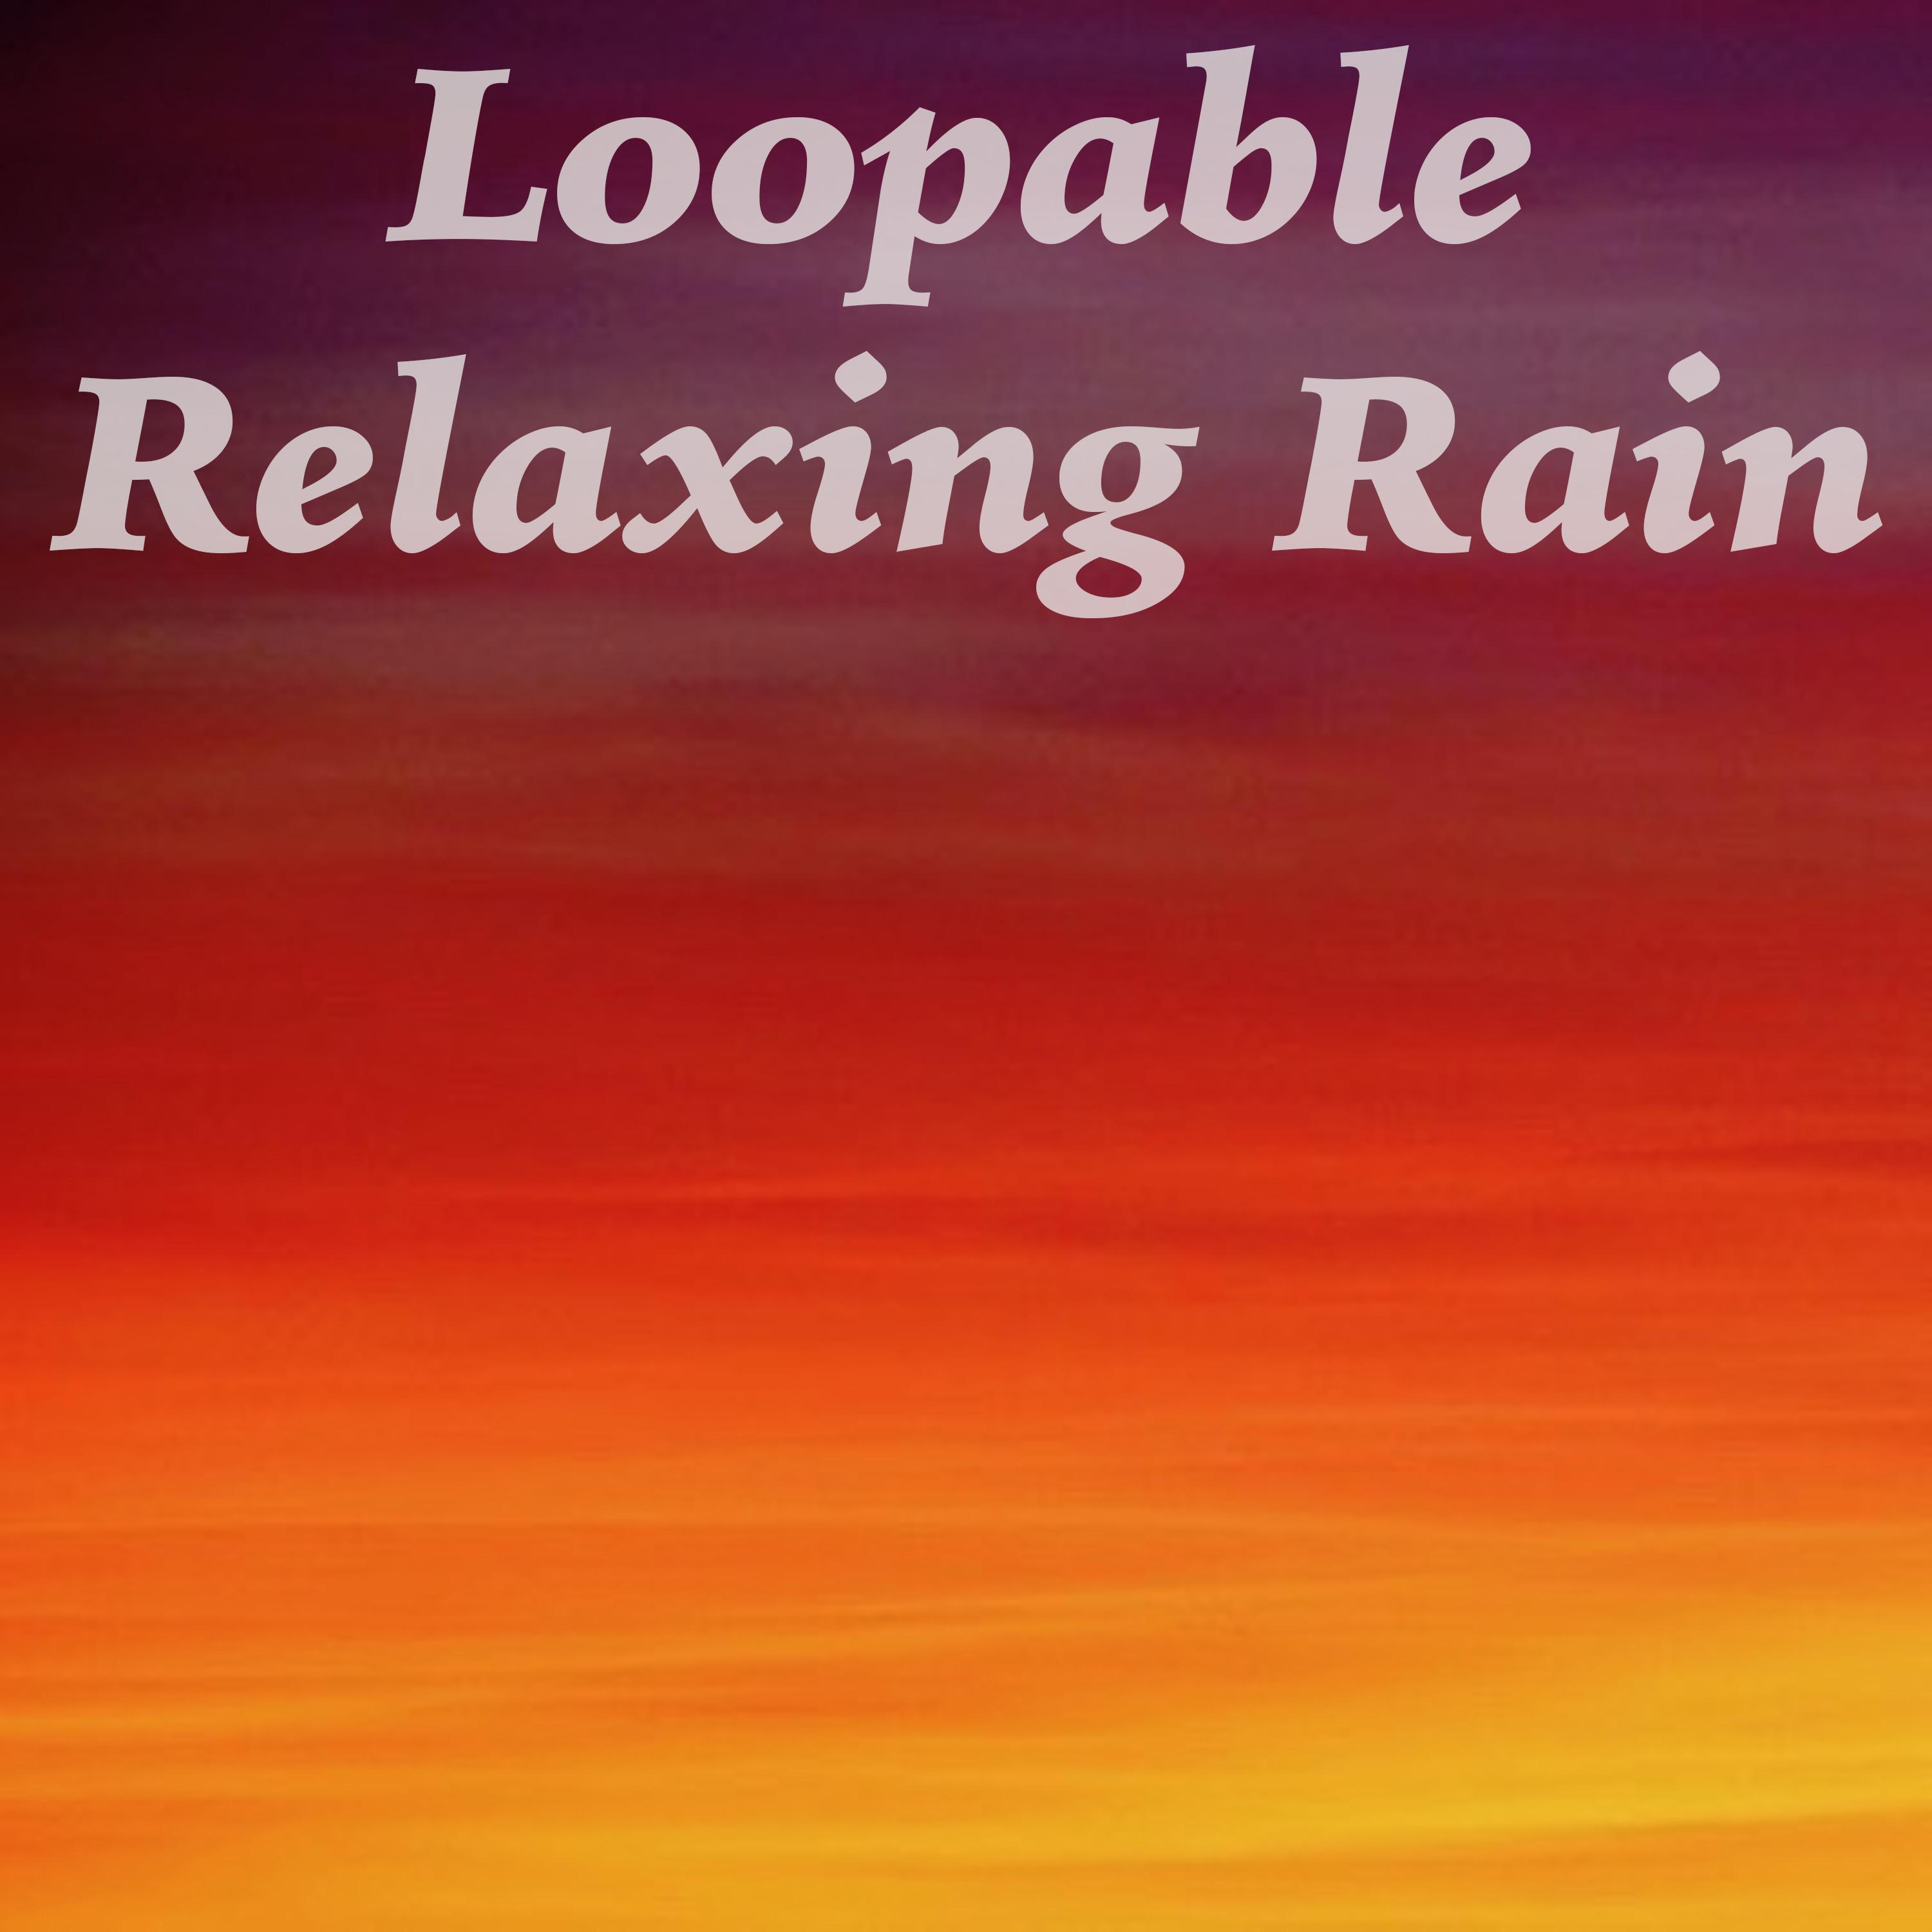 12 Loopable Relaxing Spa Sounds - Running Water and Rain